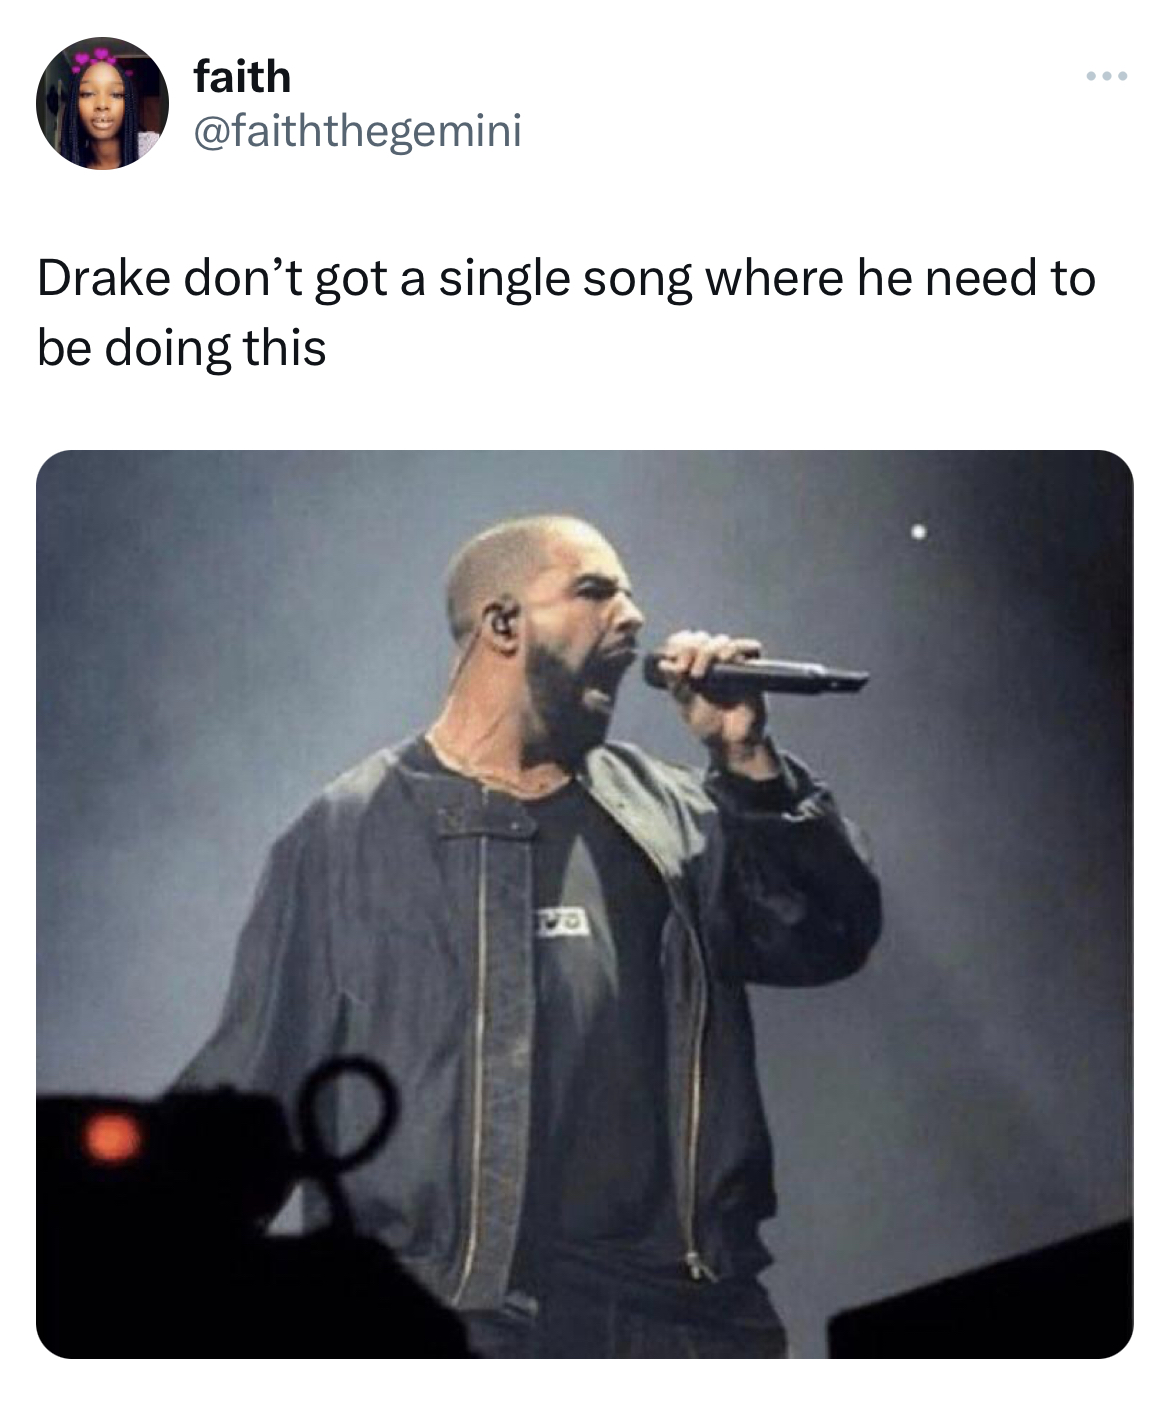 Don't have a single song where they need to do this - microphone - faith www Drake don't got a single song where he need to be doing this